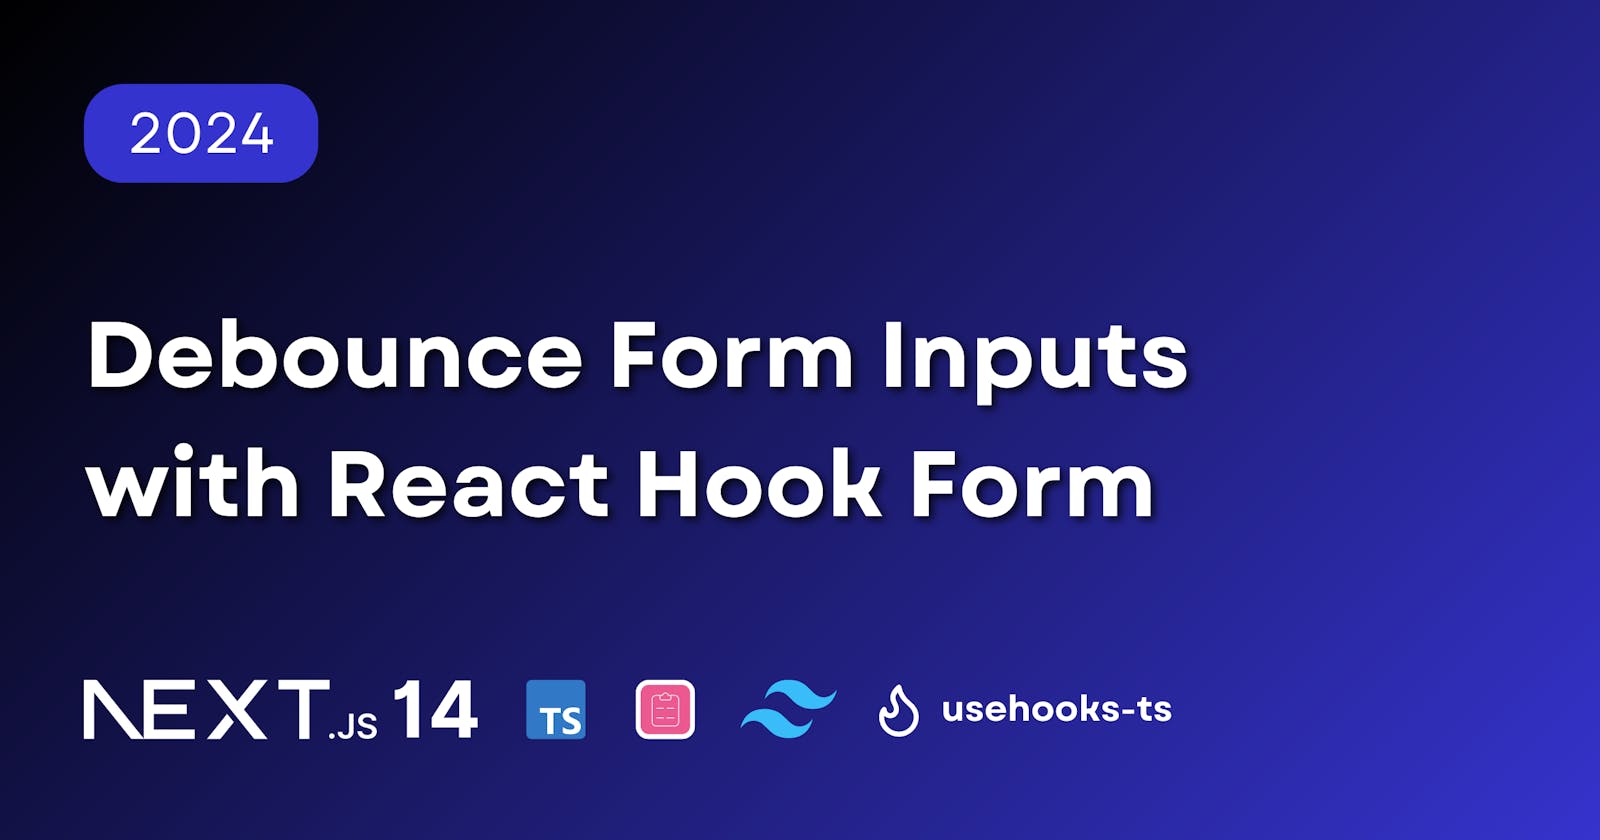 Debounce Form Inputs with React Hook Form